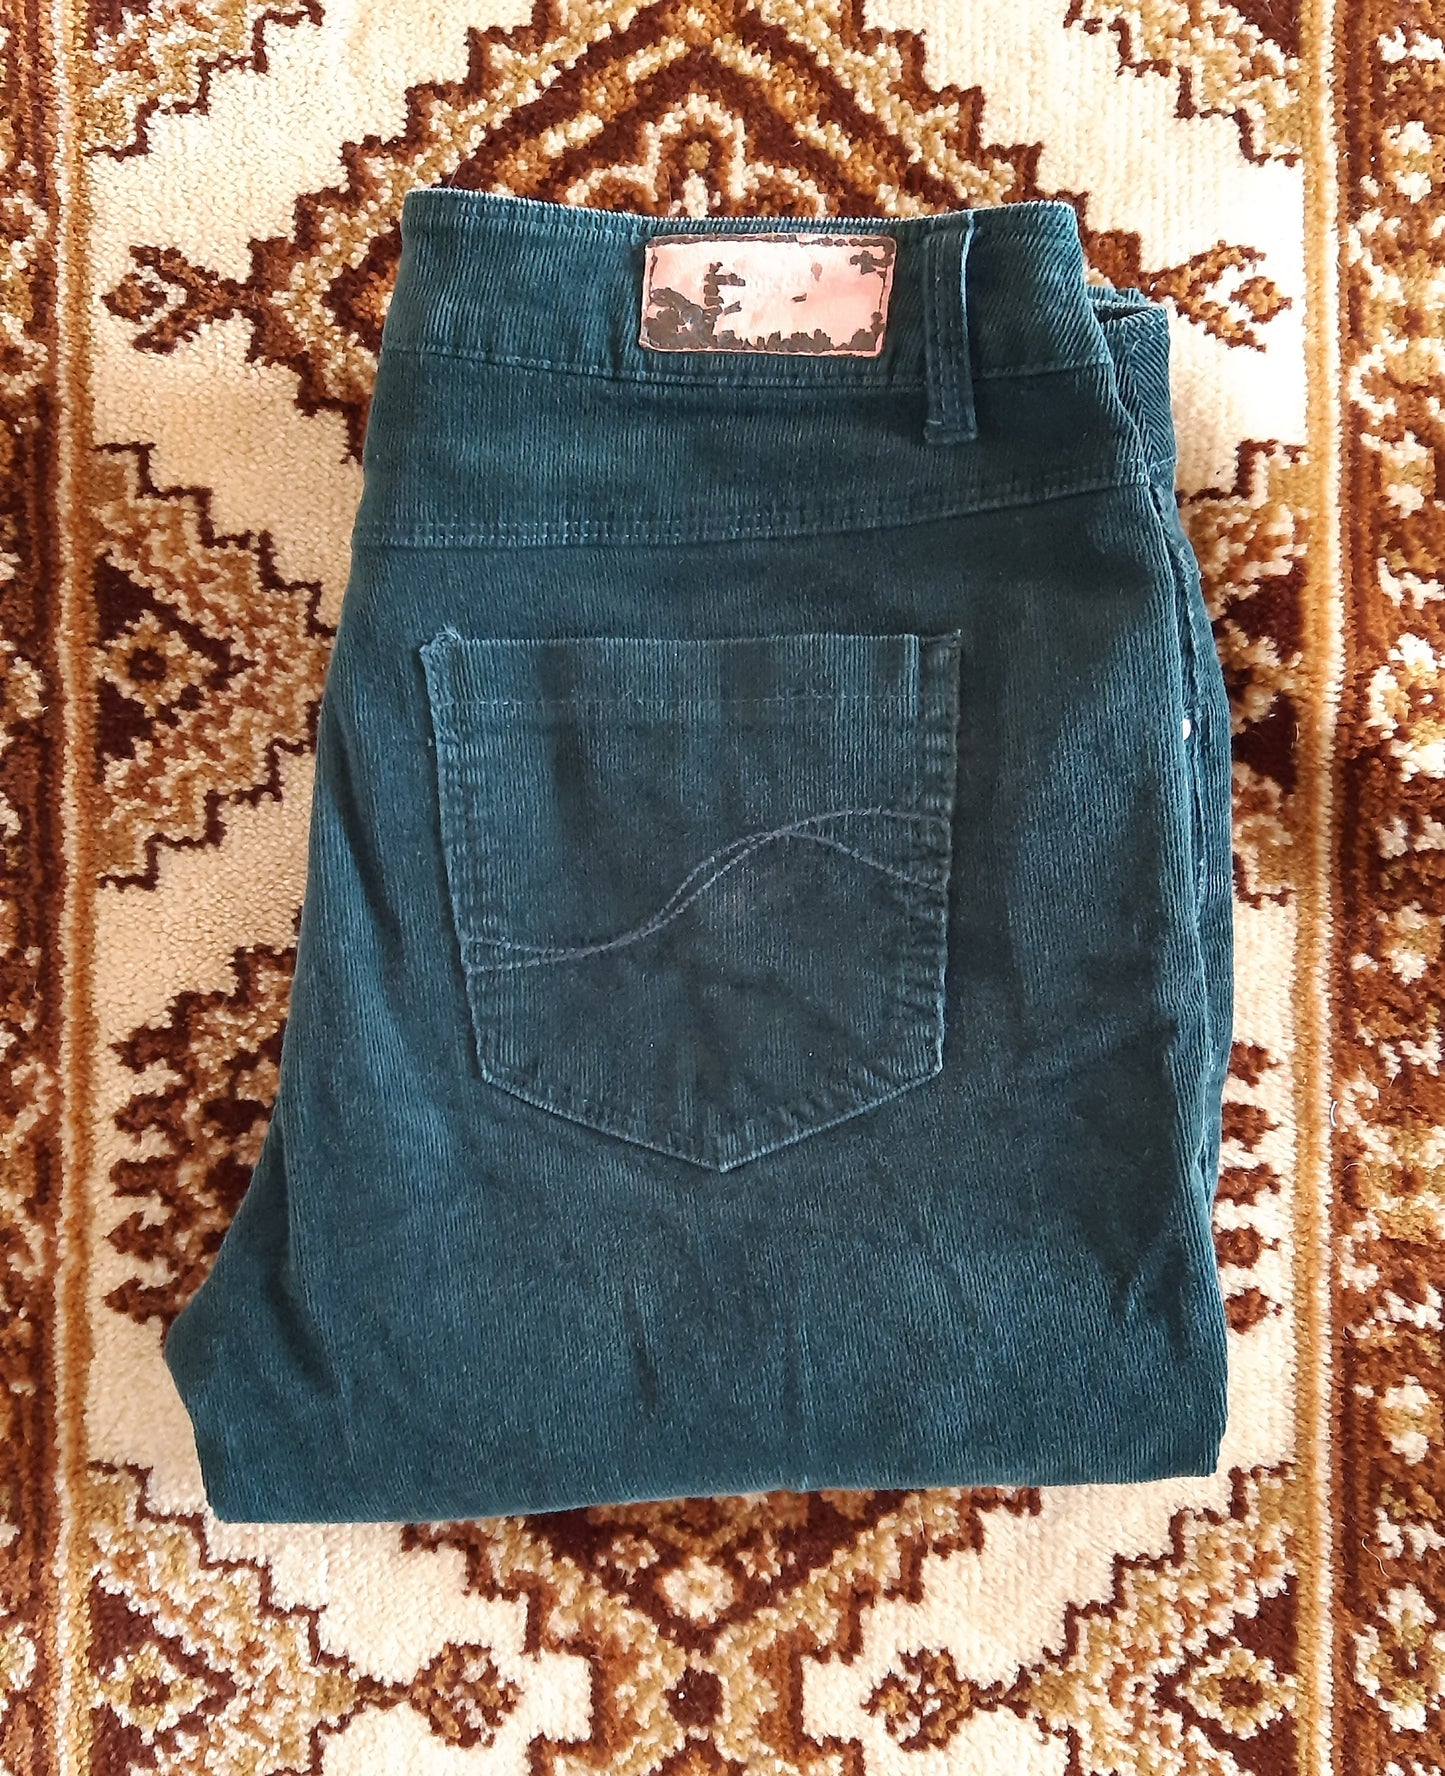 NEW IN! Turquoise corduroy jeans